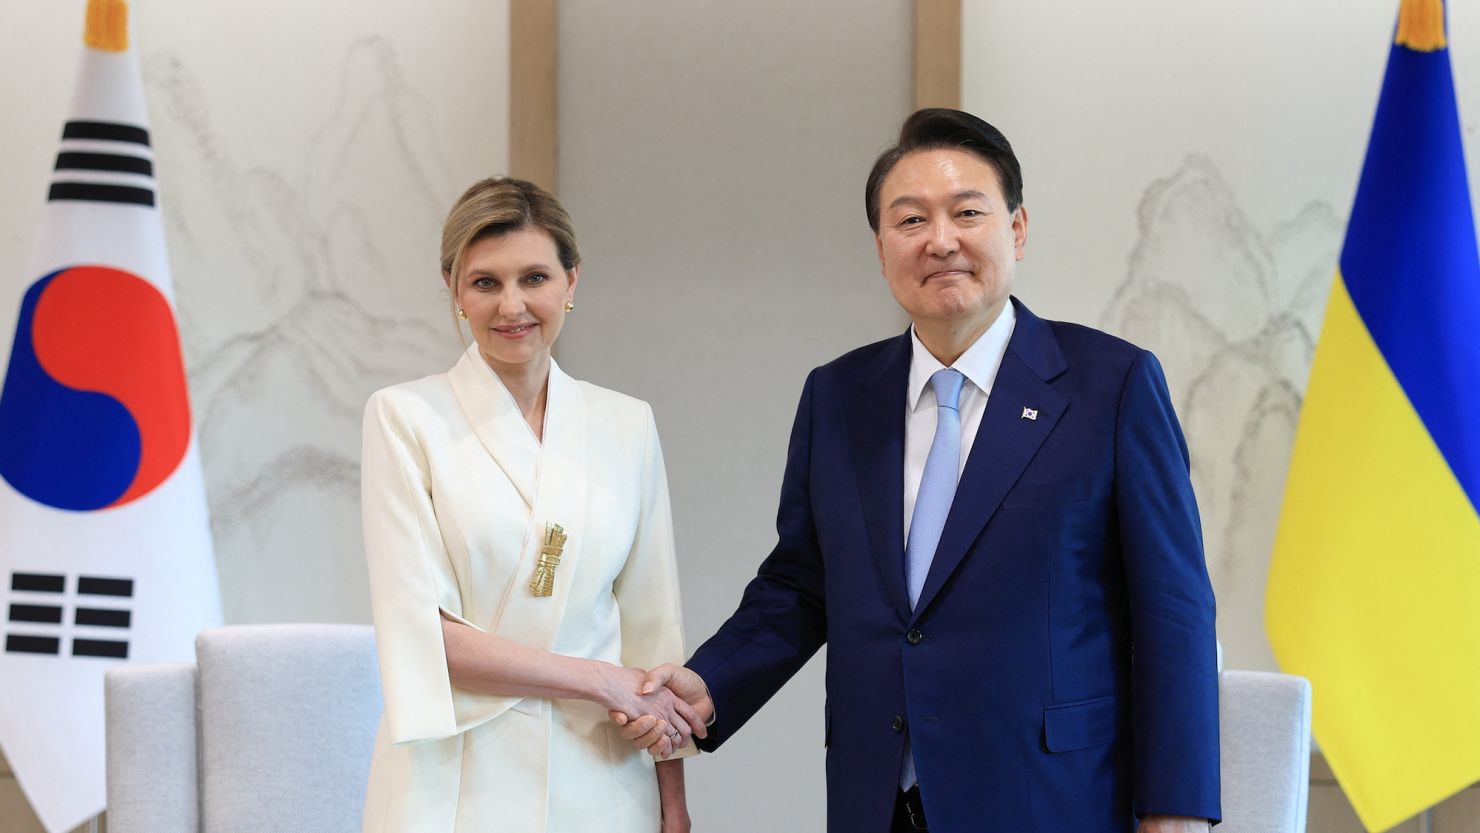 Ukraine's first lady Olena Zelenska meets with South Korean President Yoon Suk Yeol at the Presidential Office in Seoul on May 16.